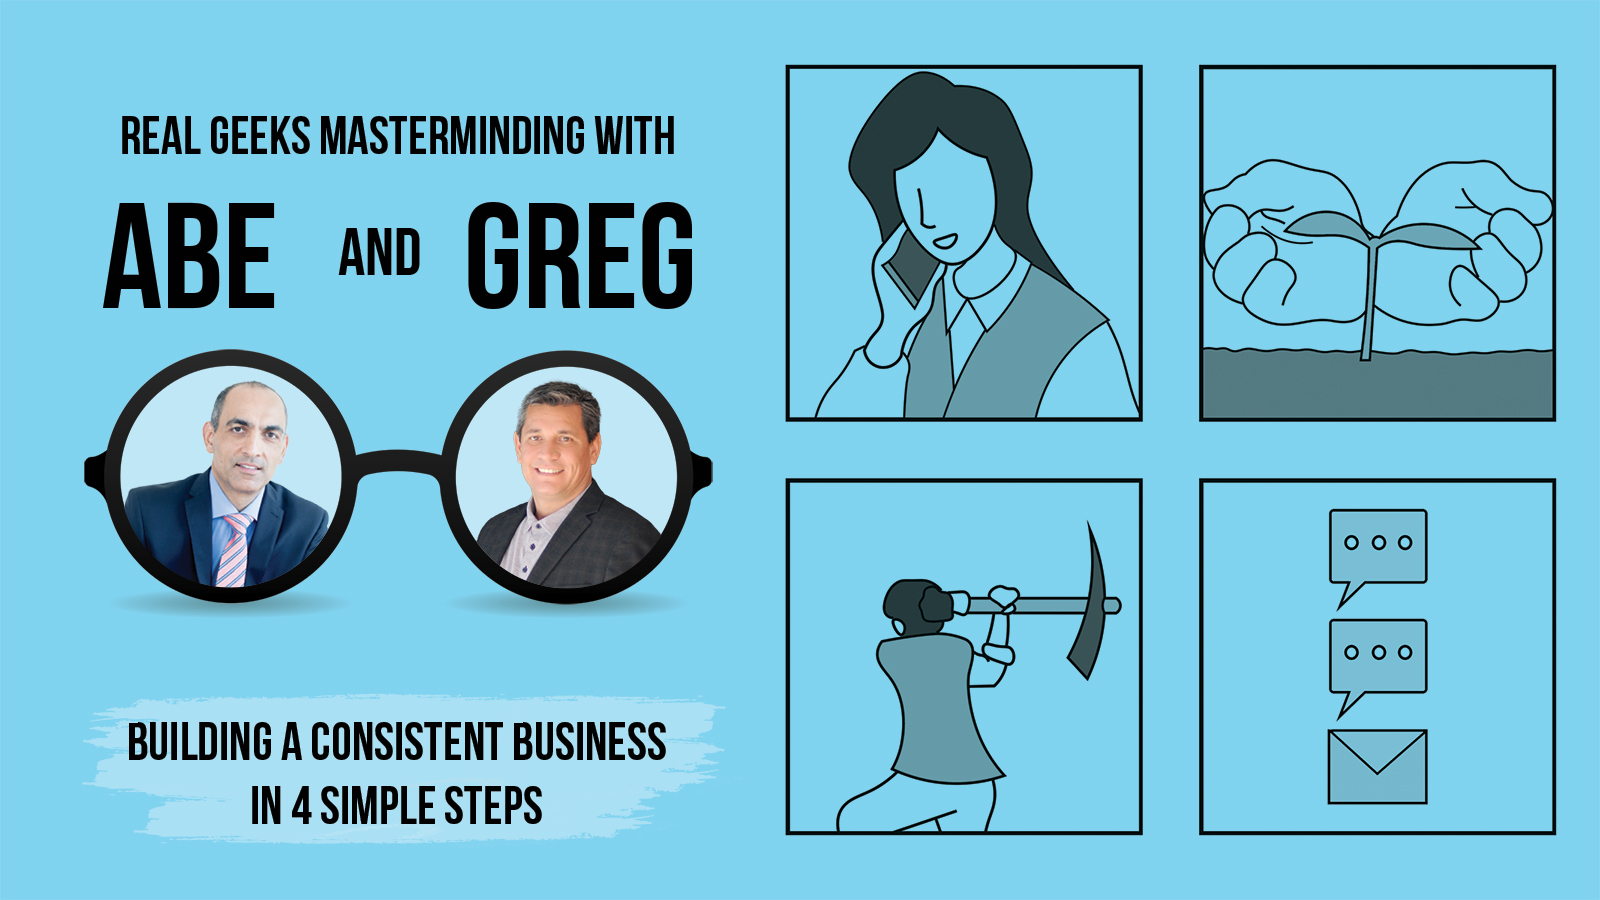 Building a Consistent Business in 4 Simple Steps